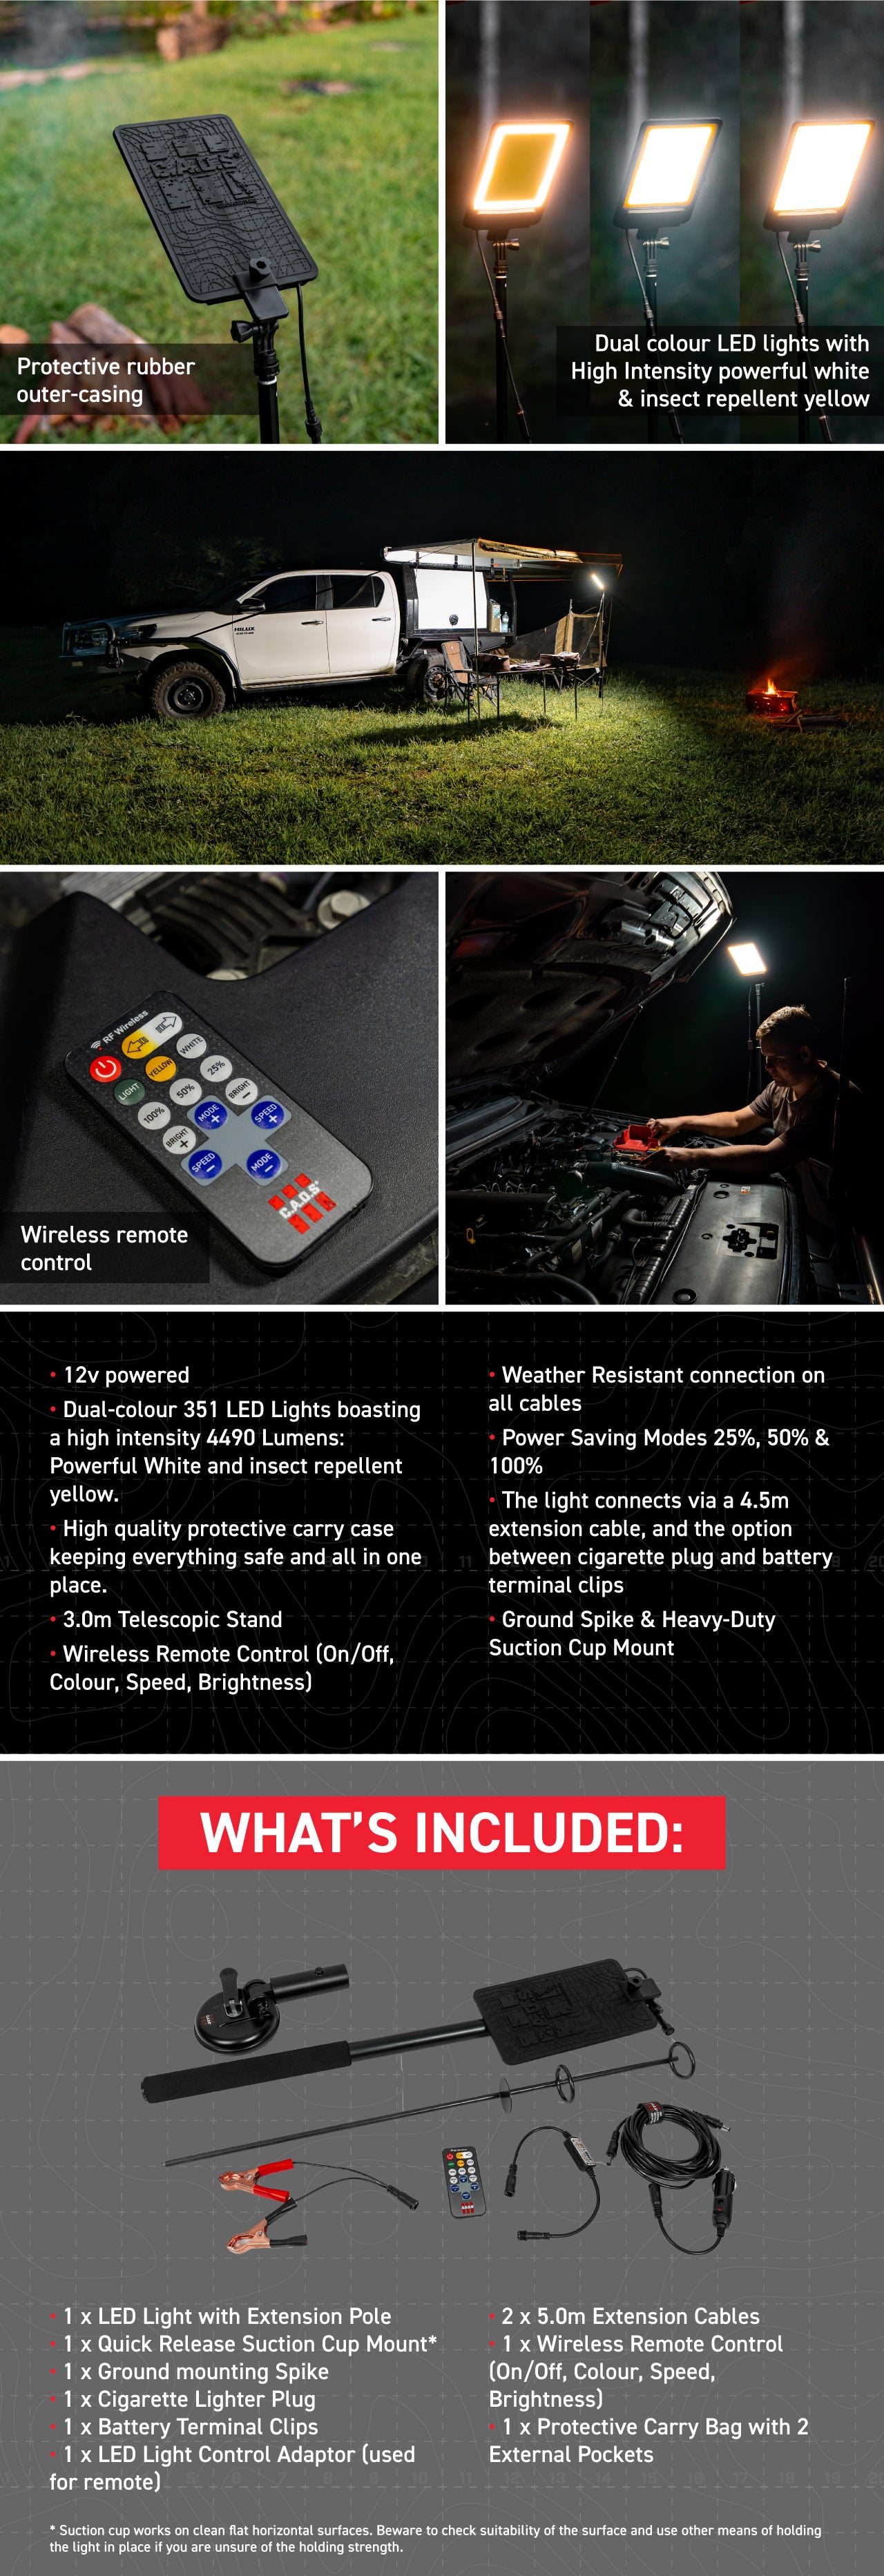 The protective carry bag makes it easy to pack, transport, and store, while the alligator clips and male 12v plug allow you to power the light from your car battery or 12v setup. With the multifunction remote, you can easily adjust the brightness and color of the light from your camp chair. The CAOS LED Camping Light is a must-have for any camping trip.